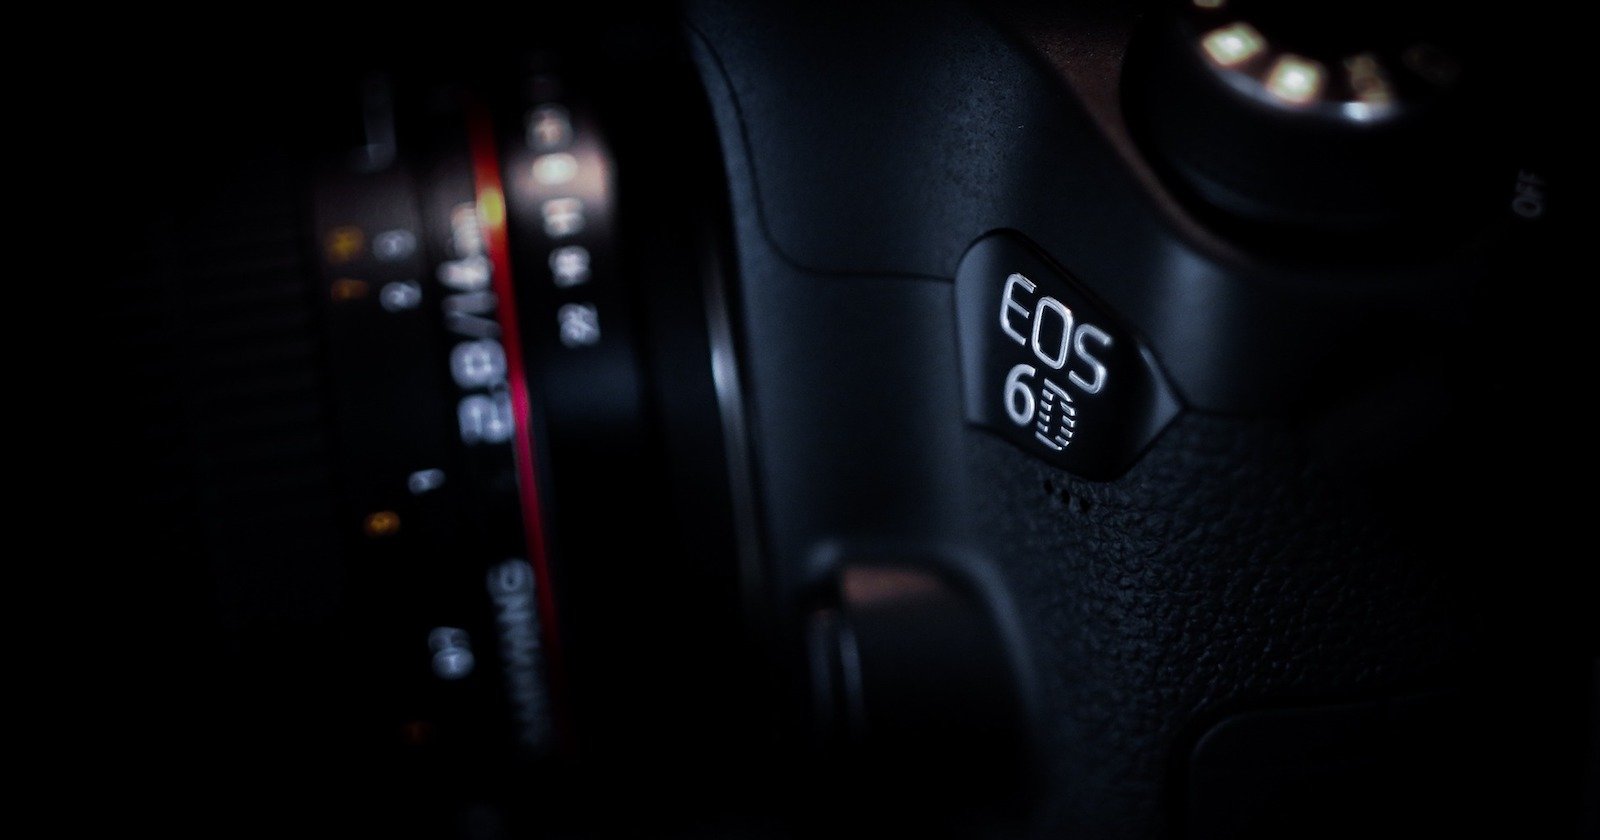 Mark Your Calendars, The Canon 6D Mark II Should Arrive in July Report